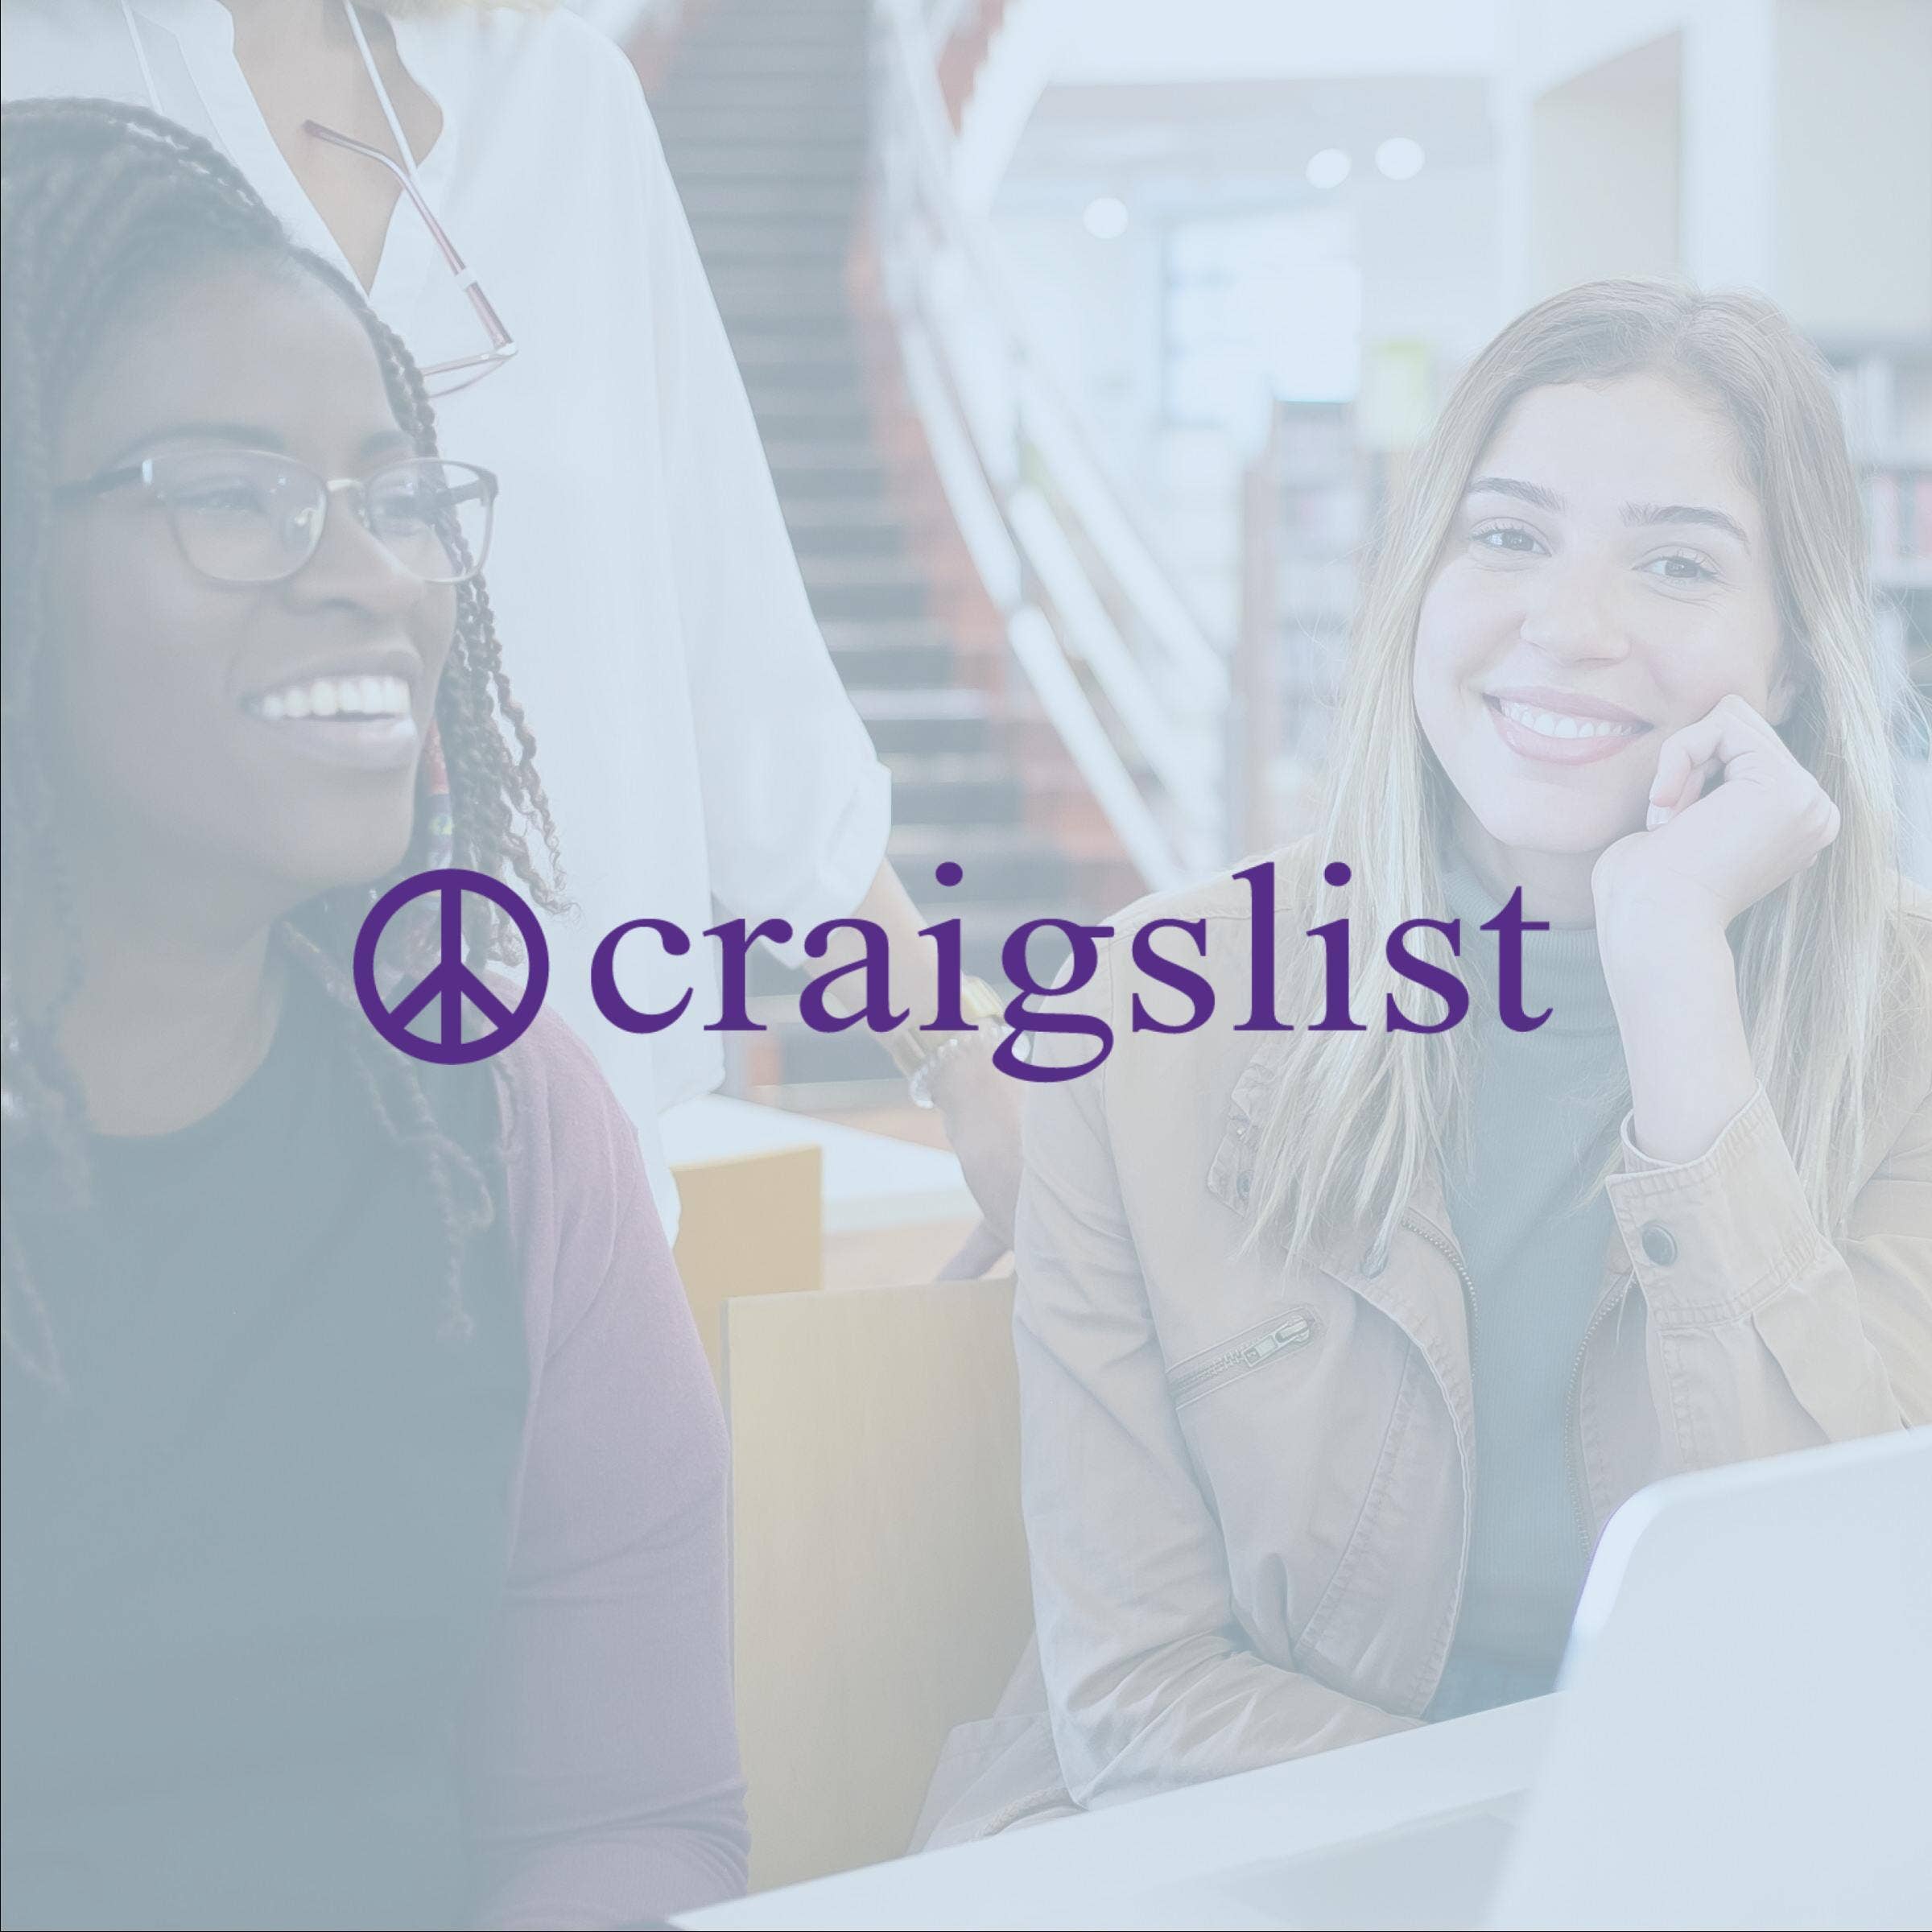 craigslist used cars for sale by owner maryland english as a second language at rice university on craigslist delaware auto parts by owner